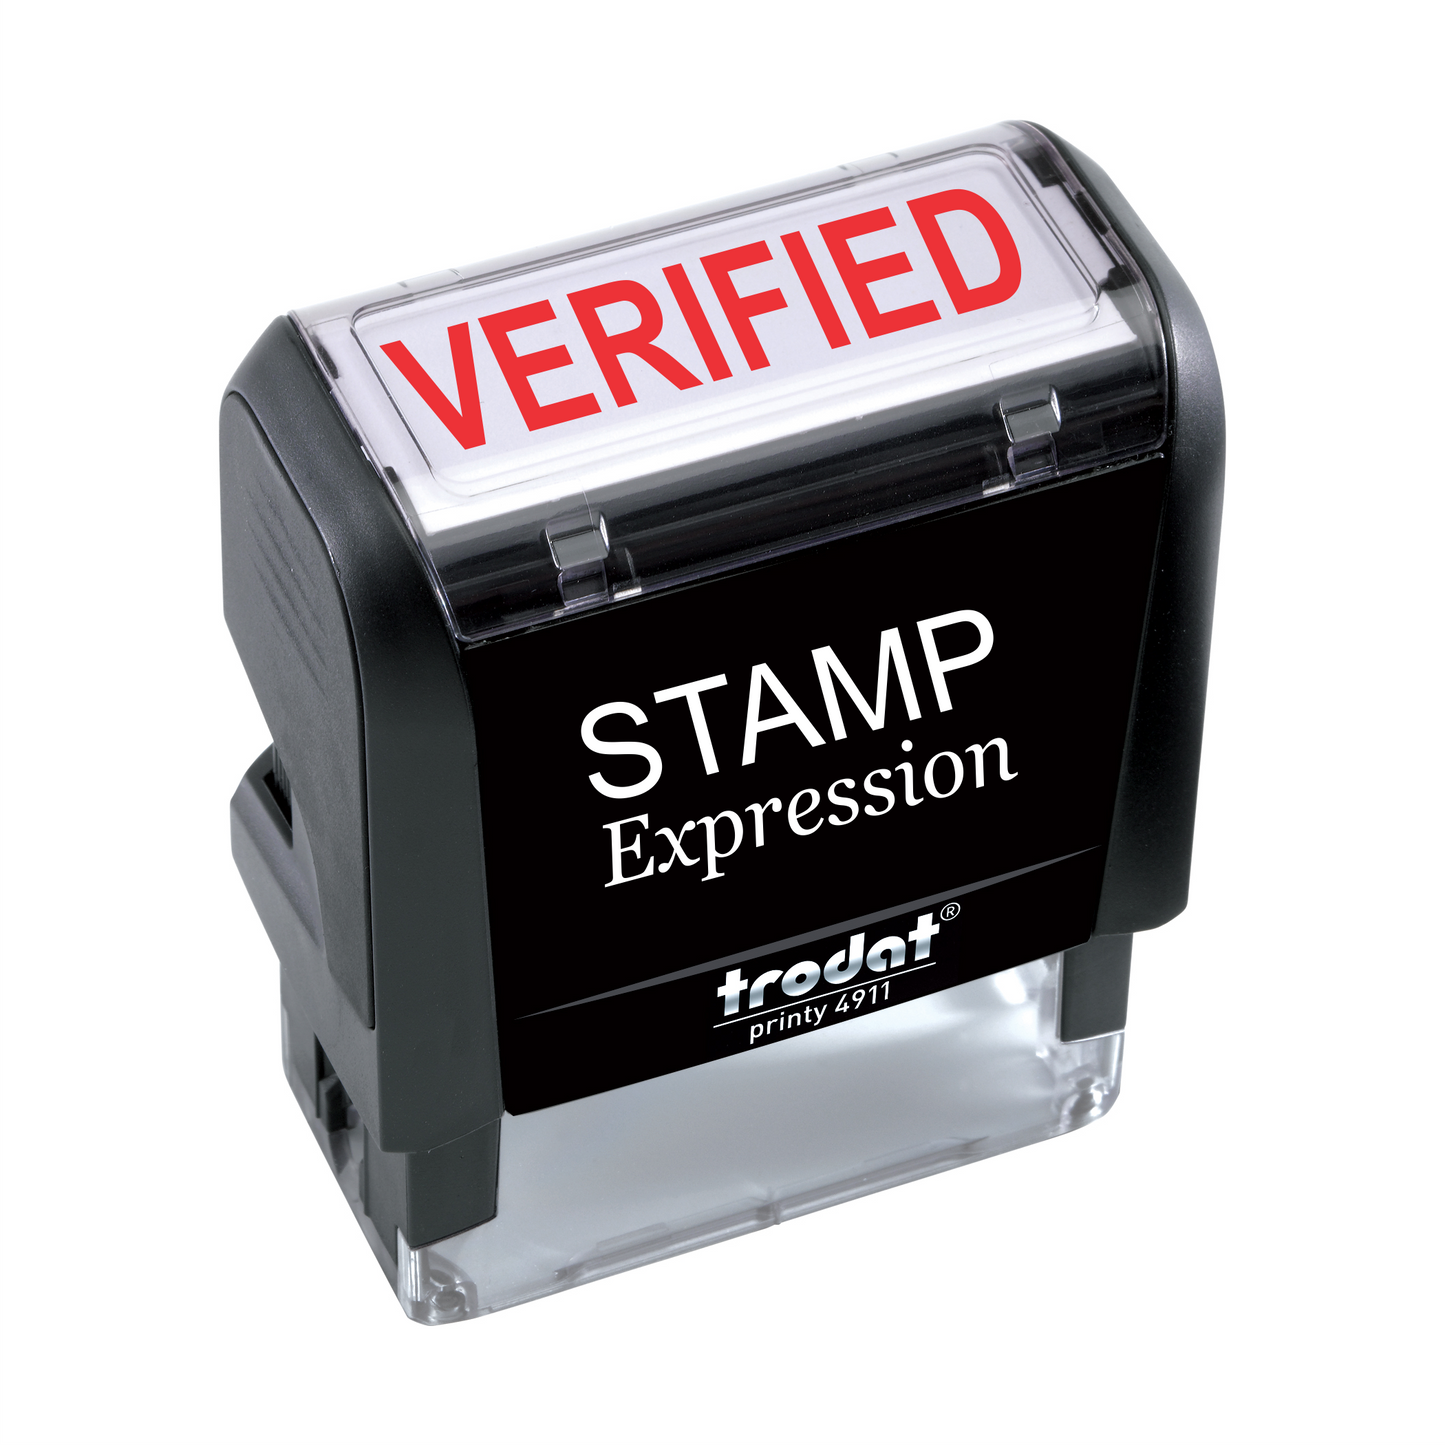 Verified Office Self Inking Rubber Stamp (SH-5422)